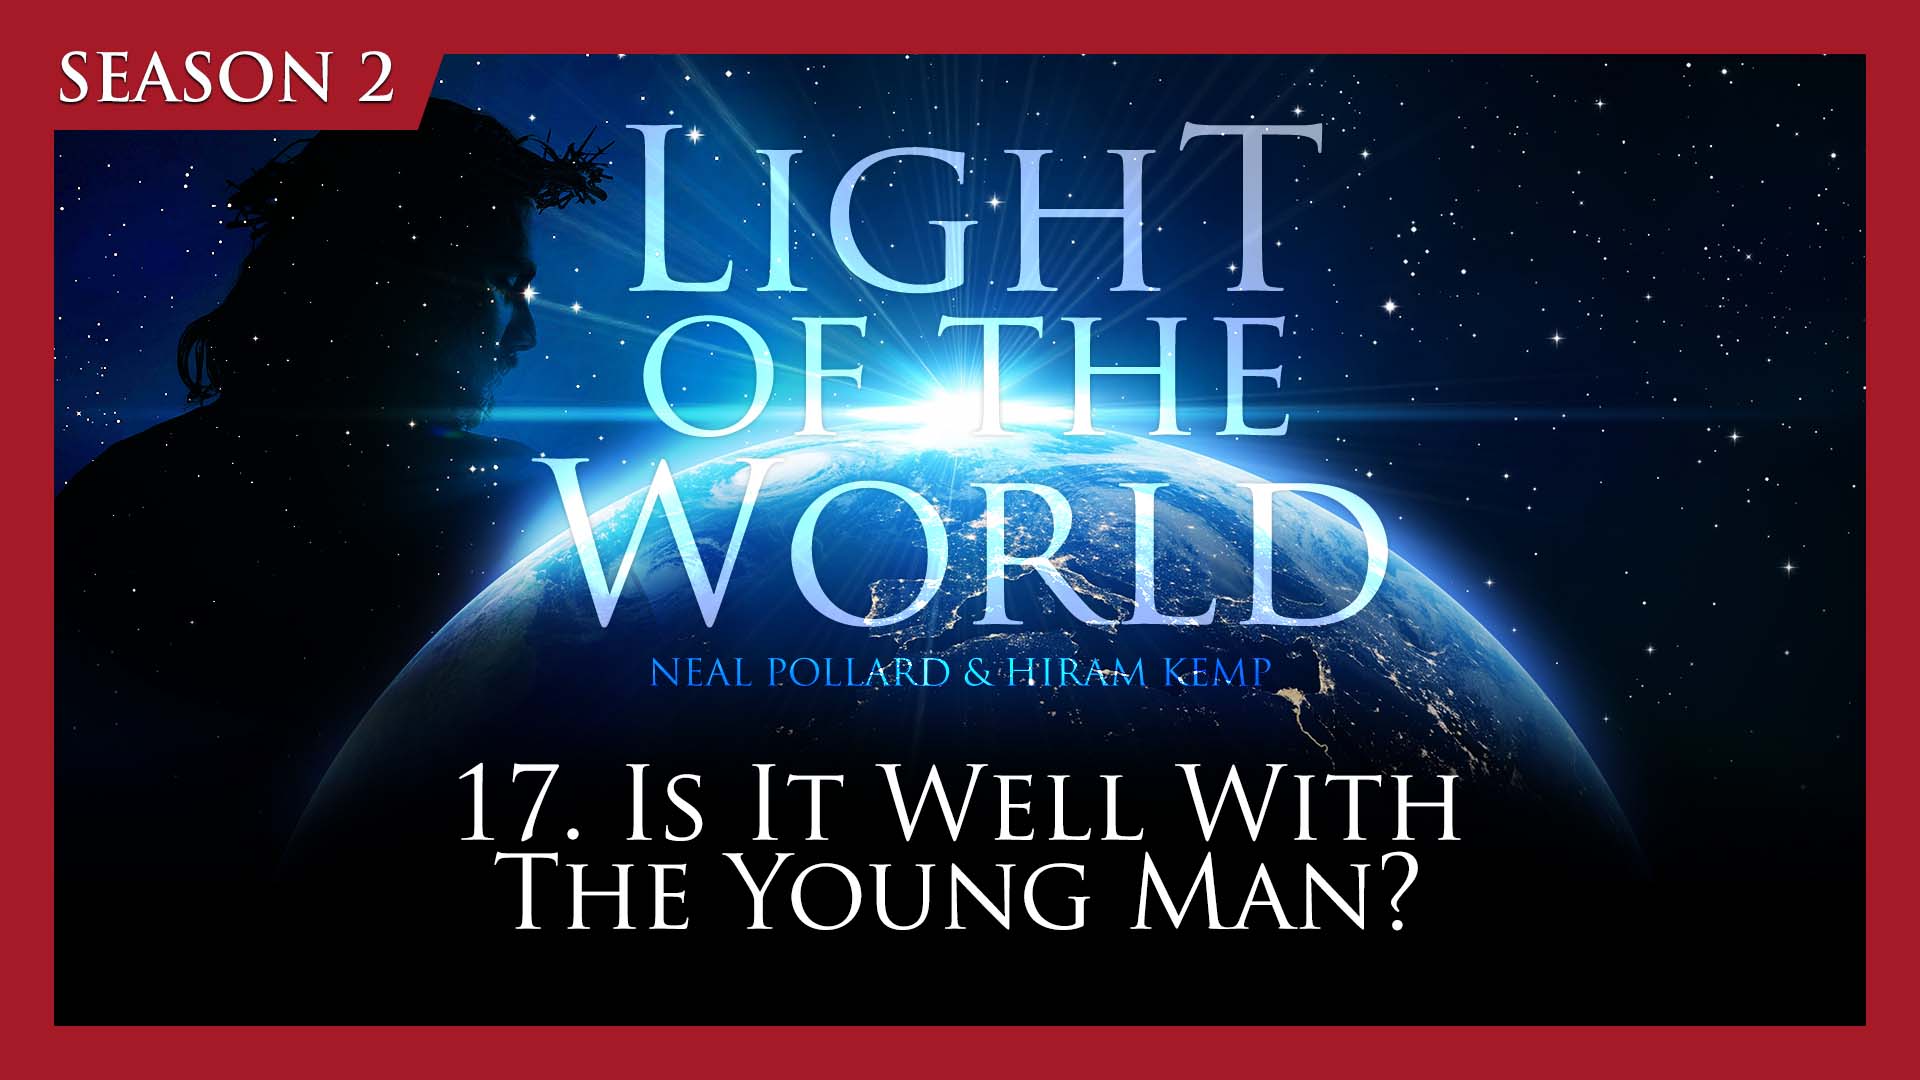 Is It Well with the Young Man | Light of the World Season 2 (Neal Pollard)